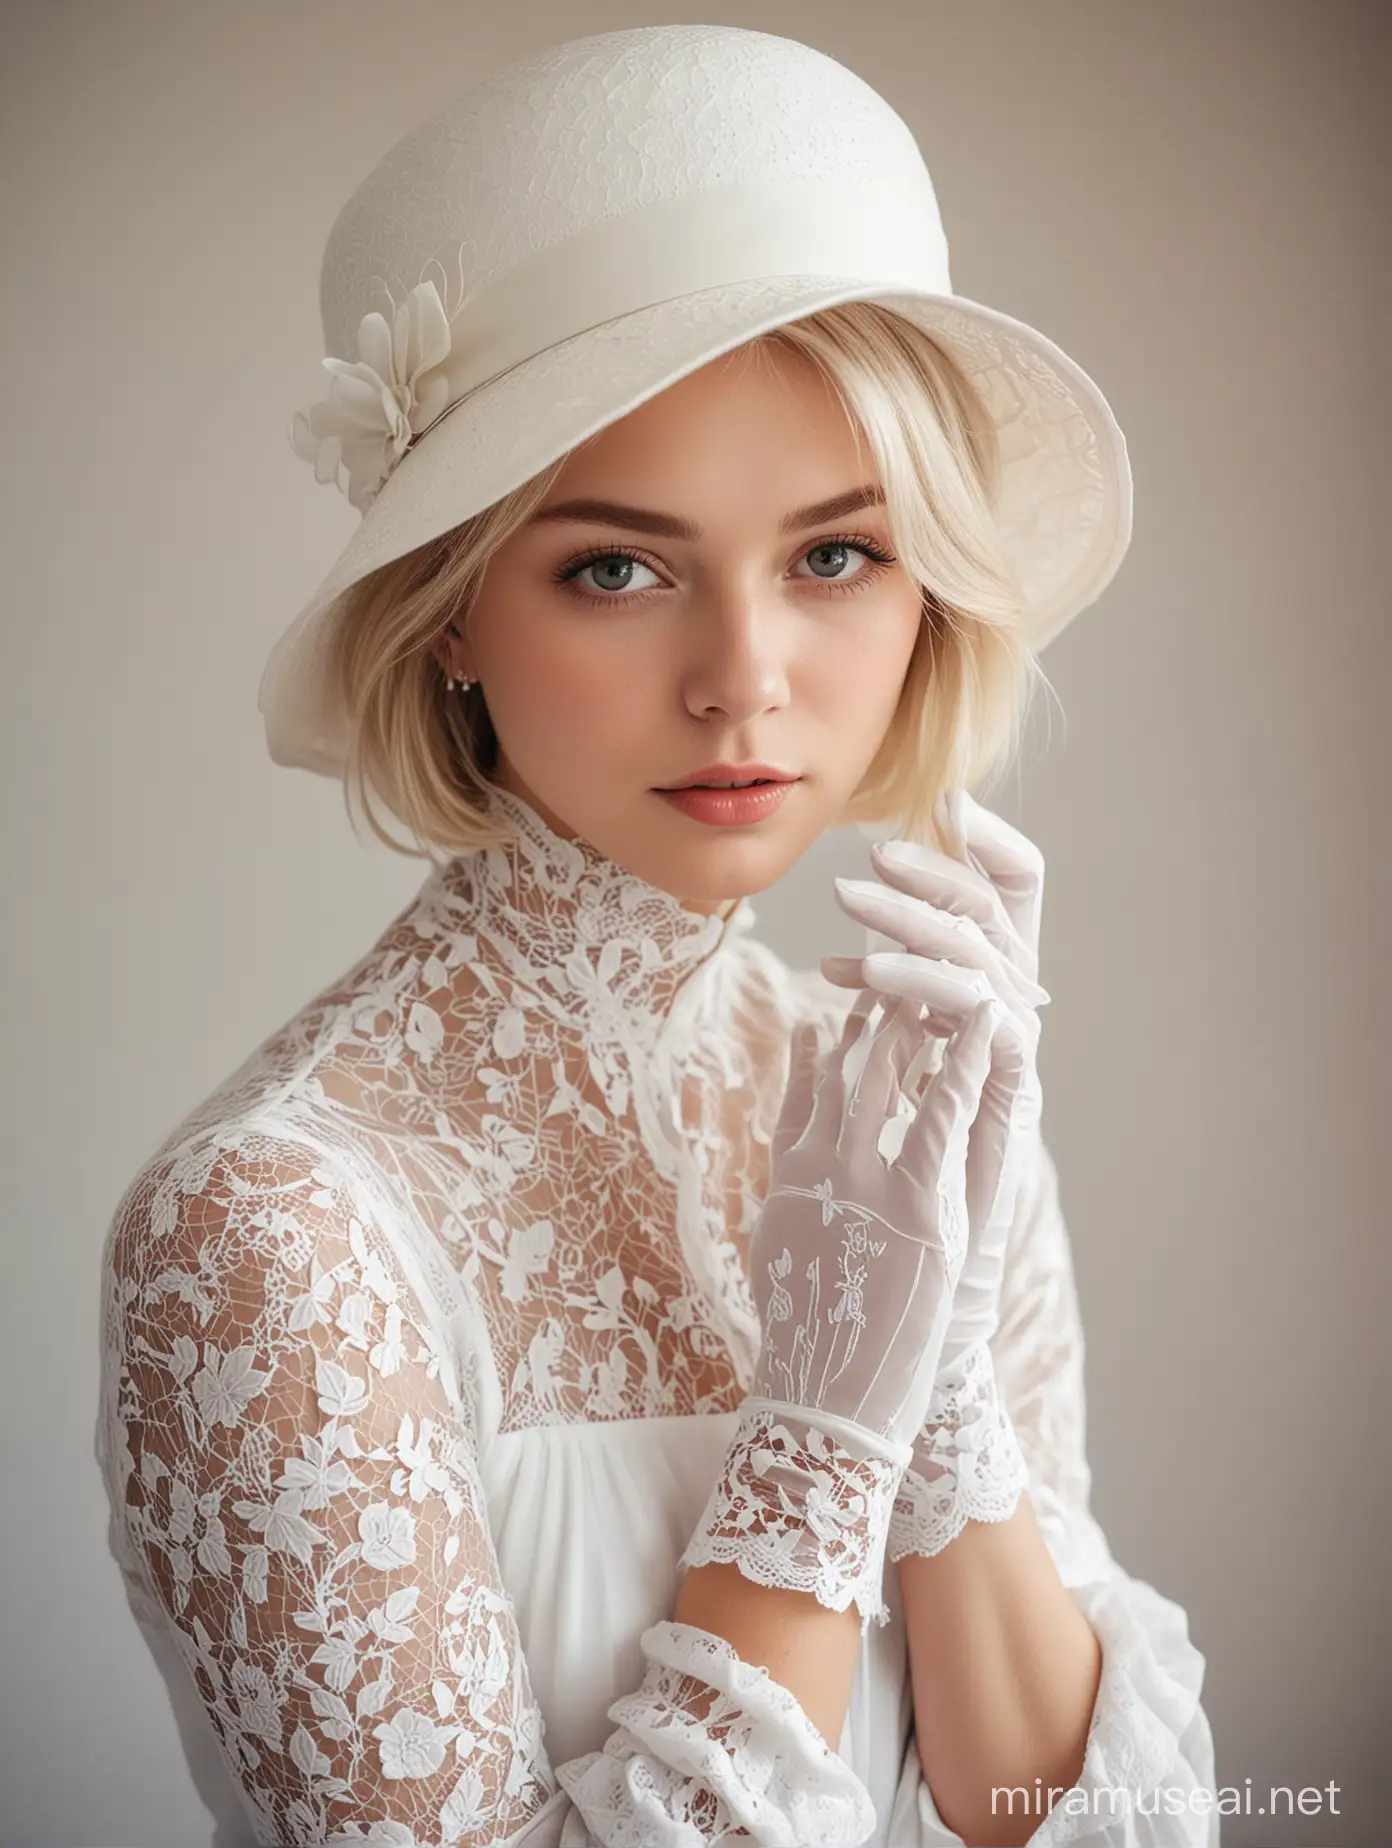 Portrait of a Girl in Elegant White Attire with Lace Gloves and Hat